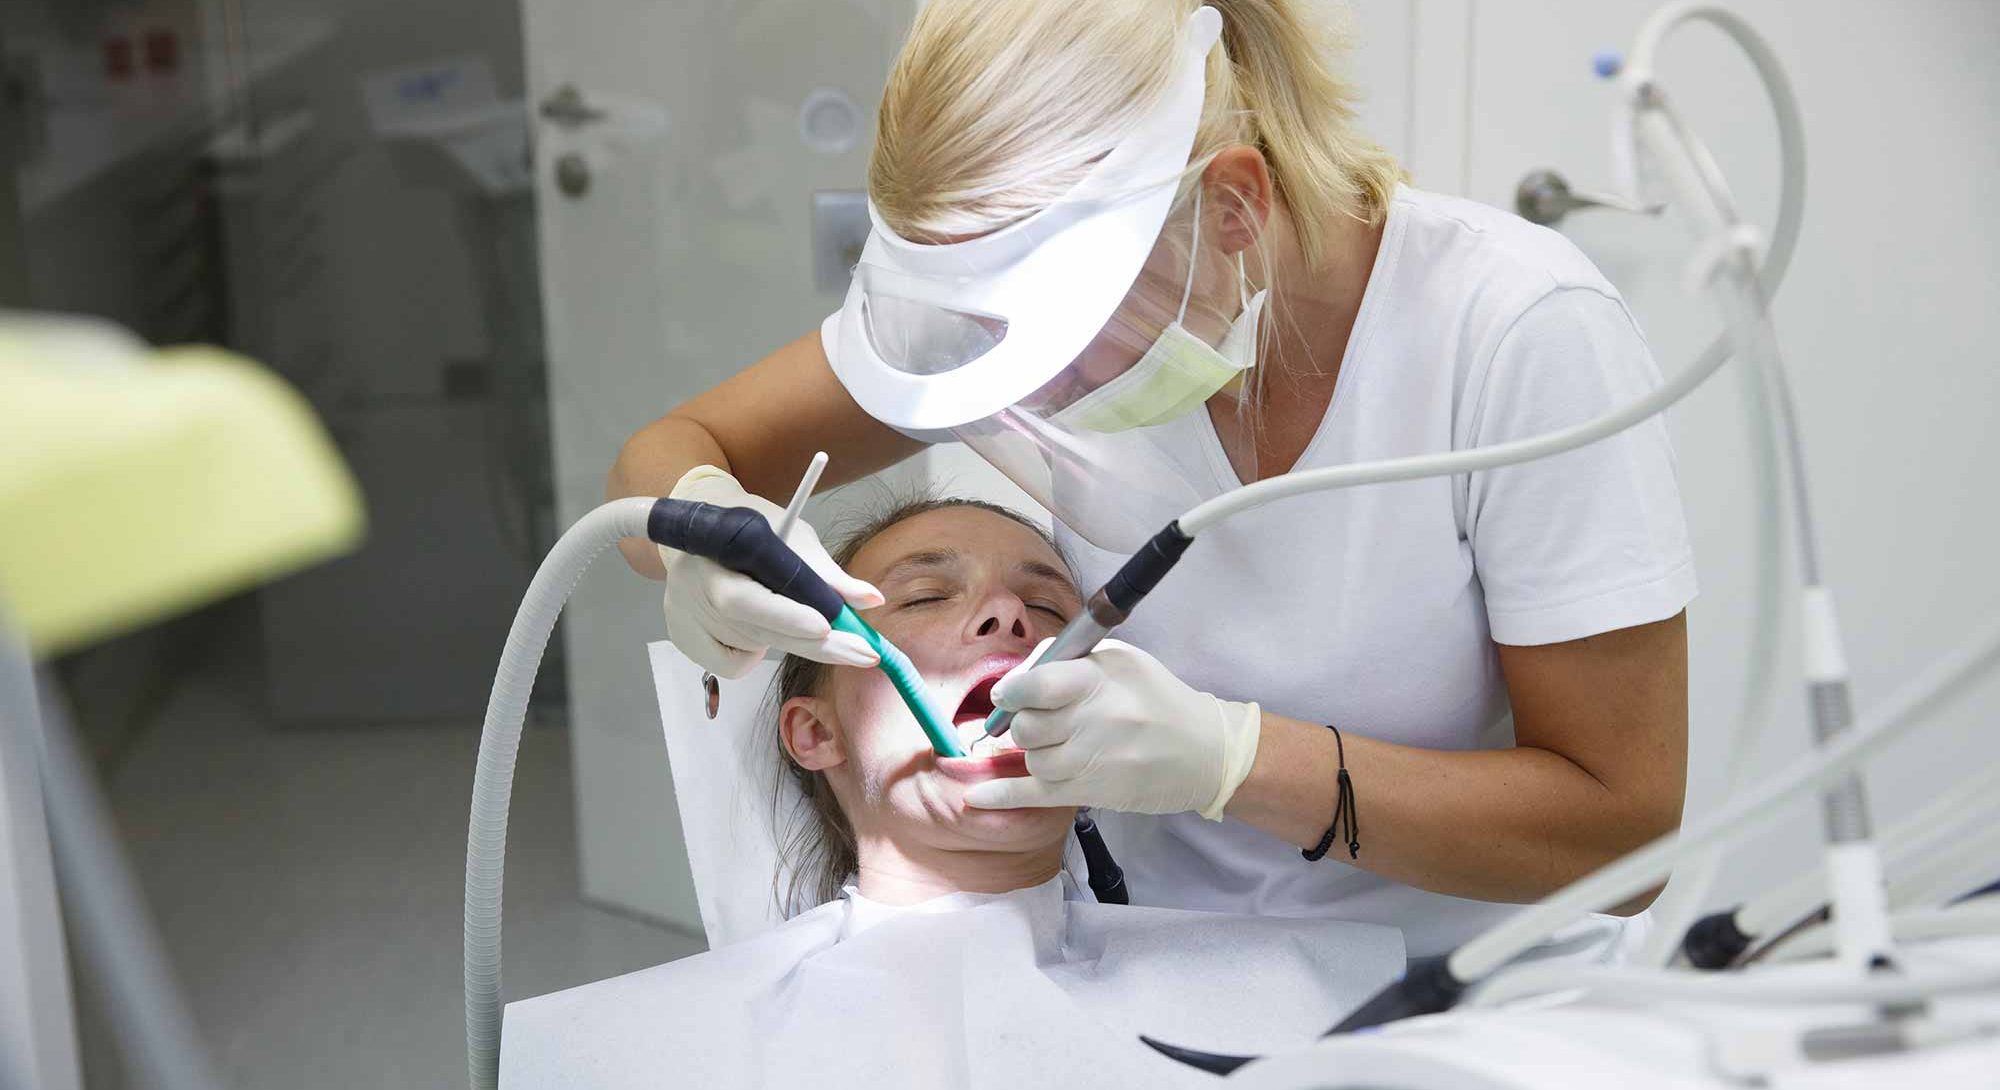 could dental therapists retrain as dentists?